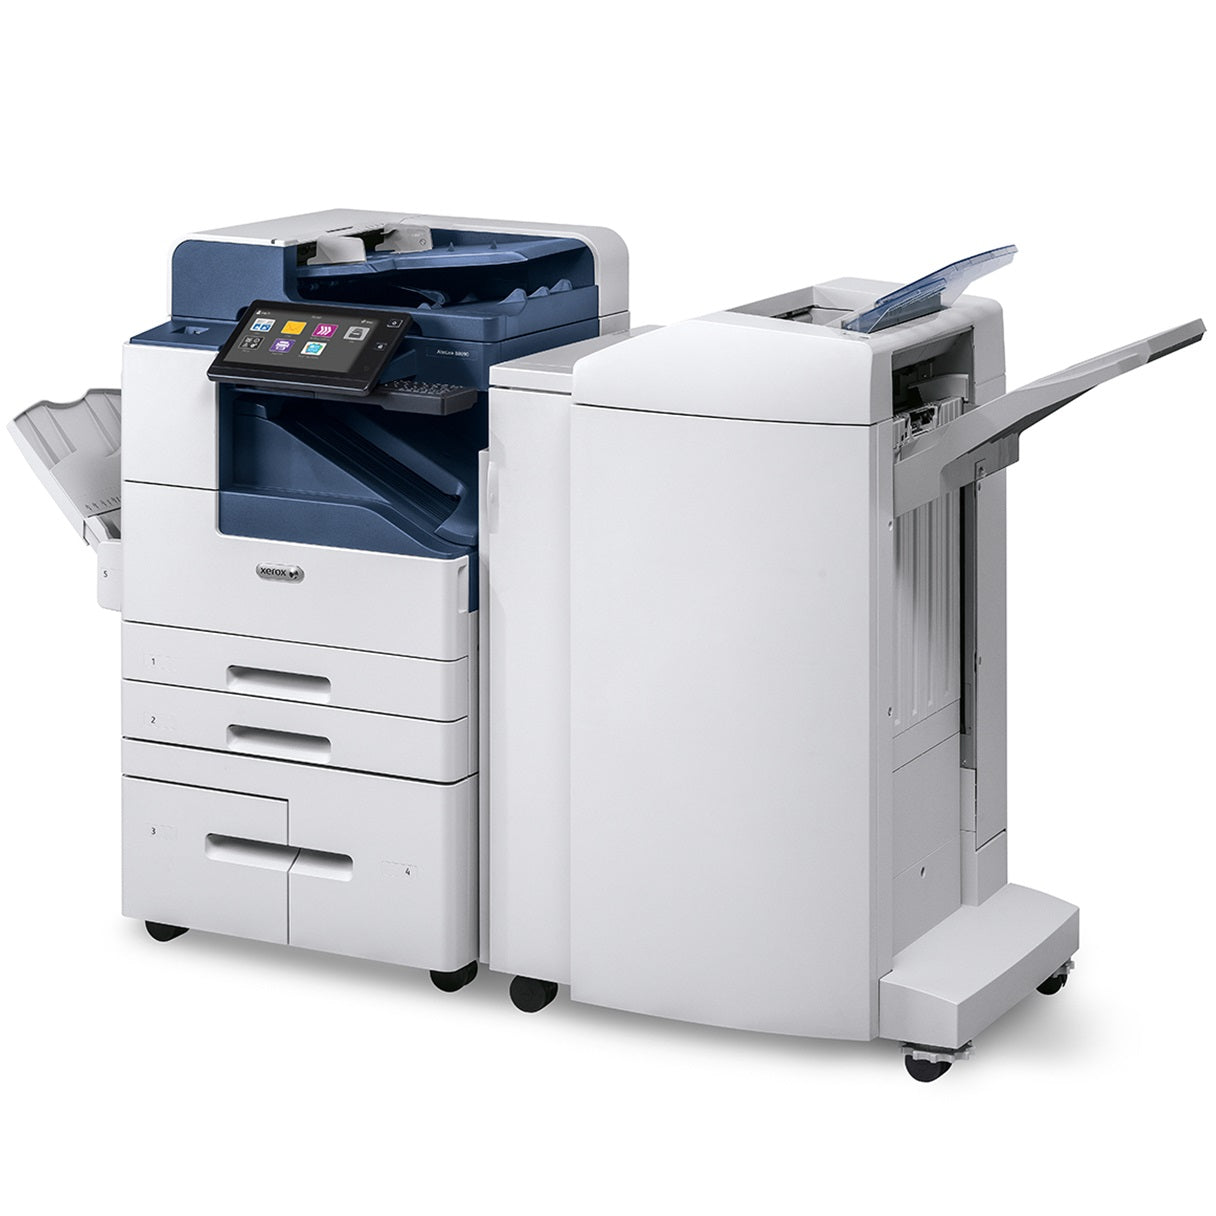 Absolute Toner $149/Month New Demo Xerox Altalink B8075 Monochrome Photocopier Printer Scanner 11x17 12x18 High Speed 75 PPM Office Copiers In Warehouse